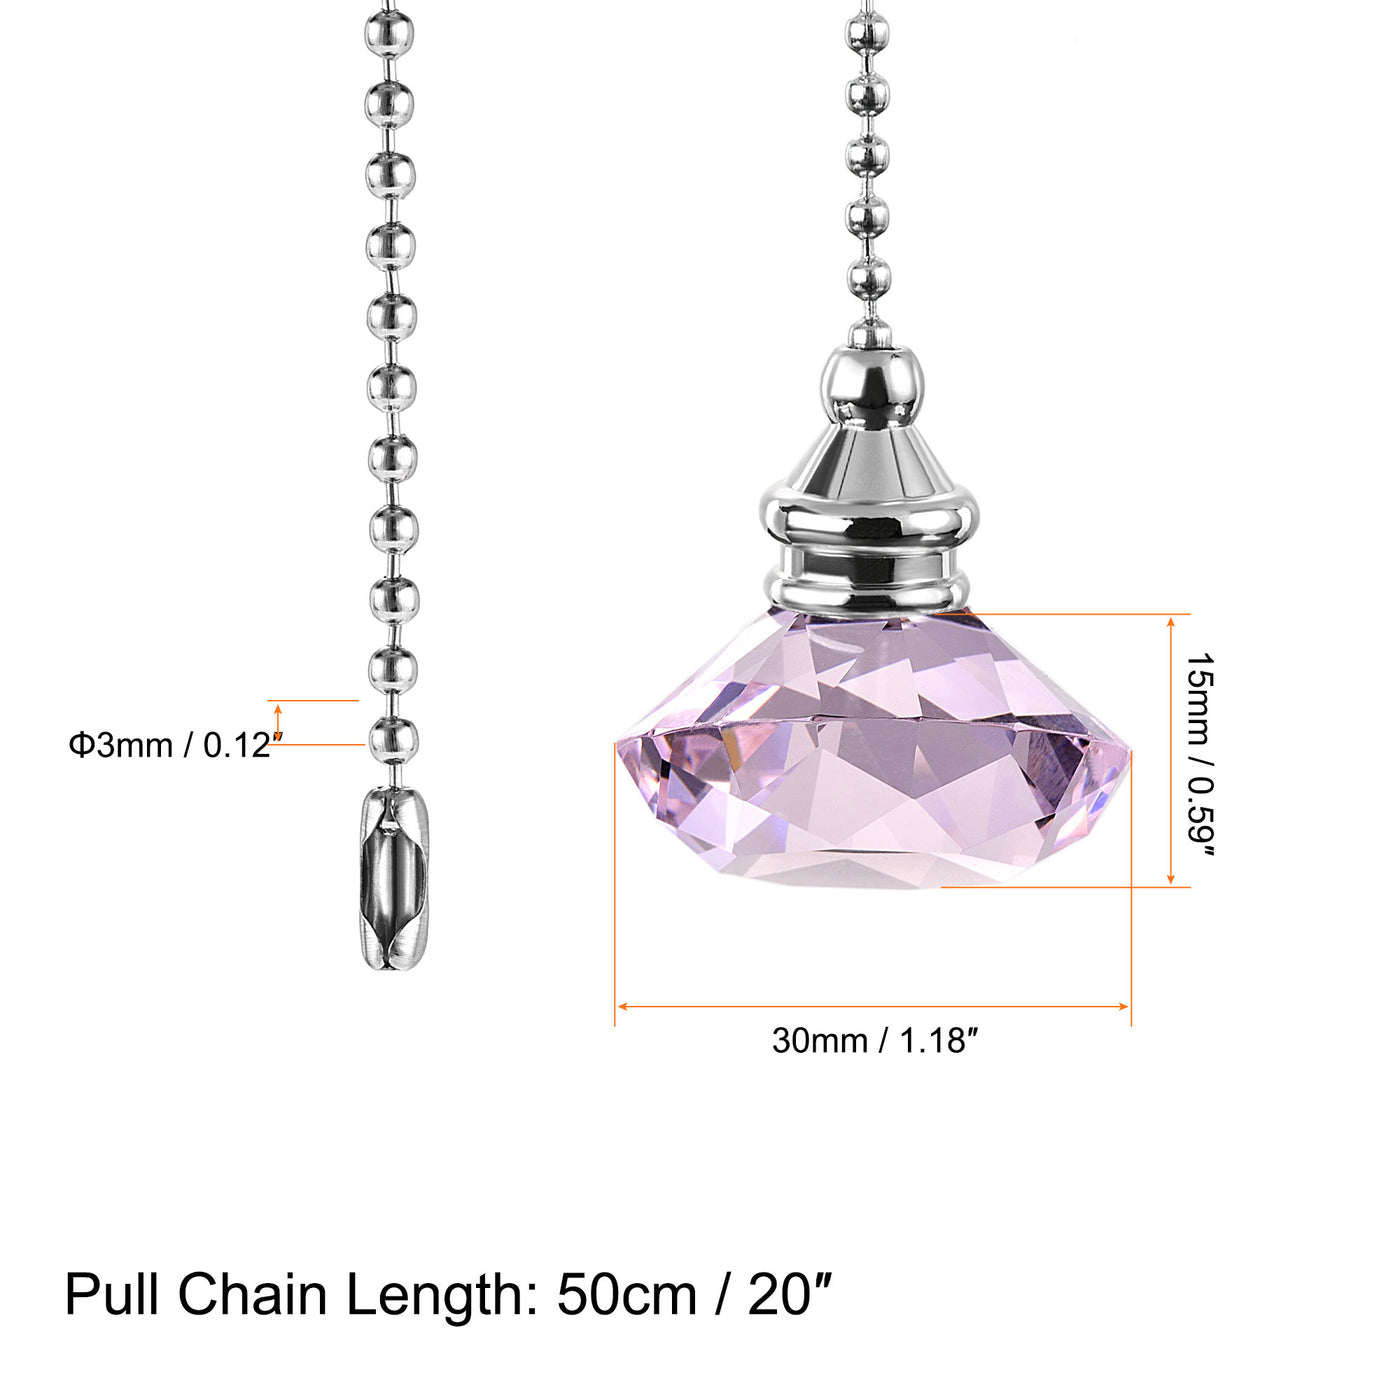 uxcell Uxcell 20 Inch Ceiling Fan Pull Chain, Decorative Crystal Fan Pull Chain Ornament Extension, 3mm Diameter Beaded Diamond Pendant, Pink